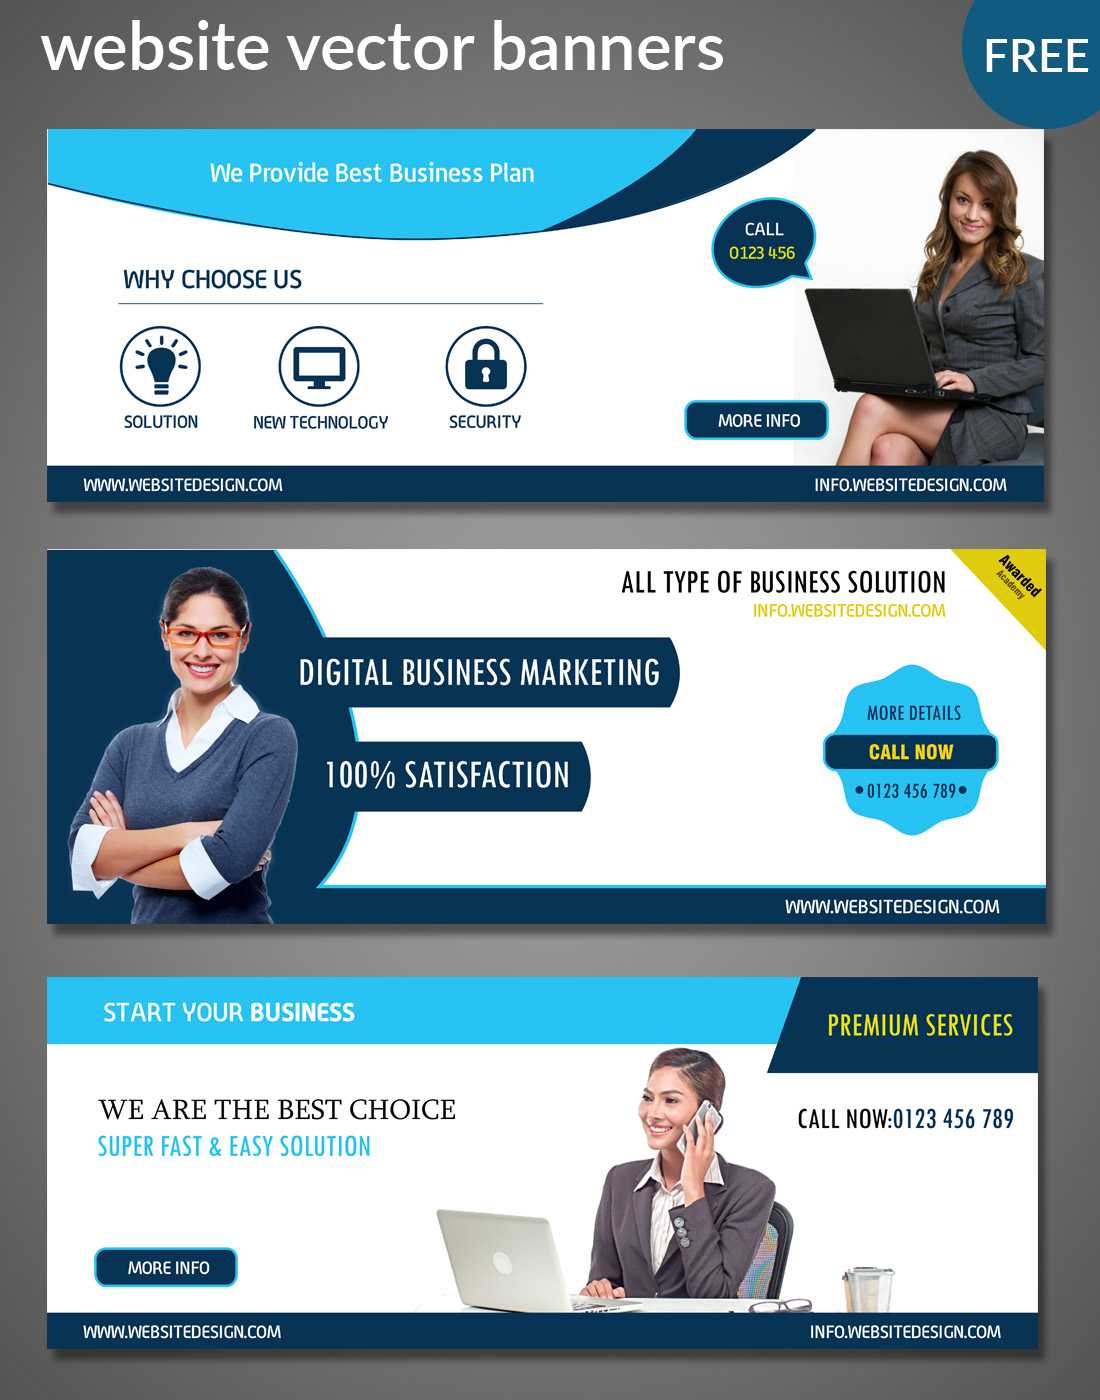 Website Banners Templates Intended For Free Website Banner Templates Download